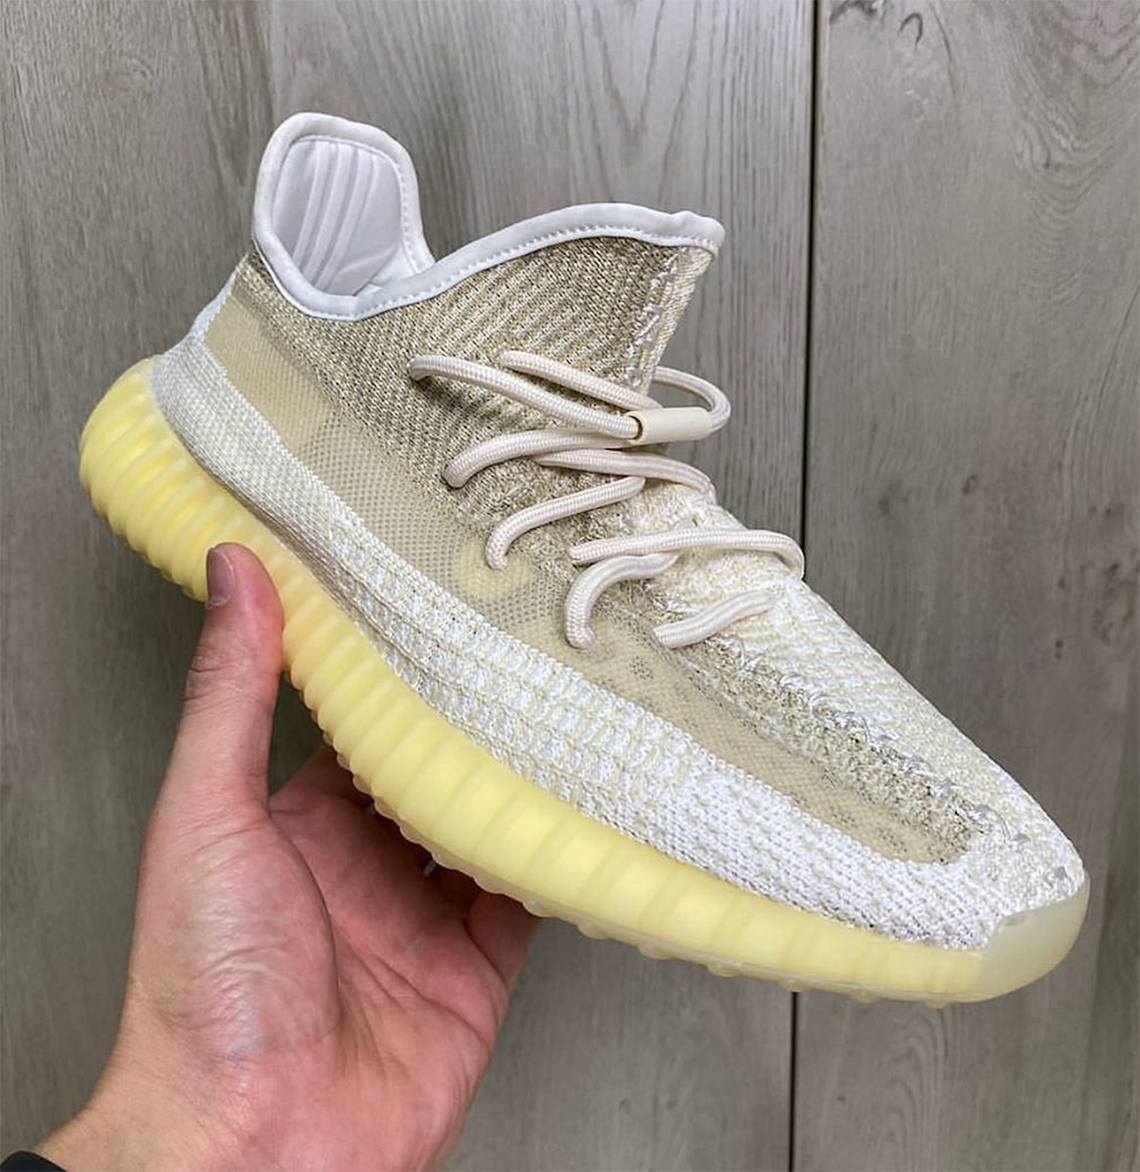 adidas Yeezy Boost 350 v2 Natural Release Info | SneakerNews.com